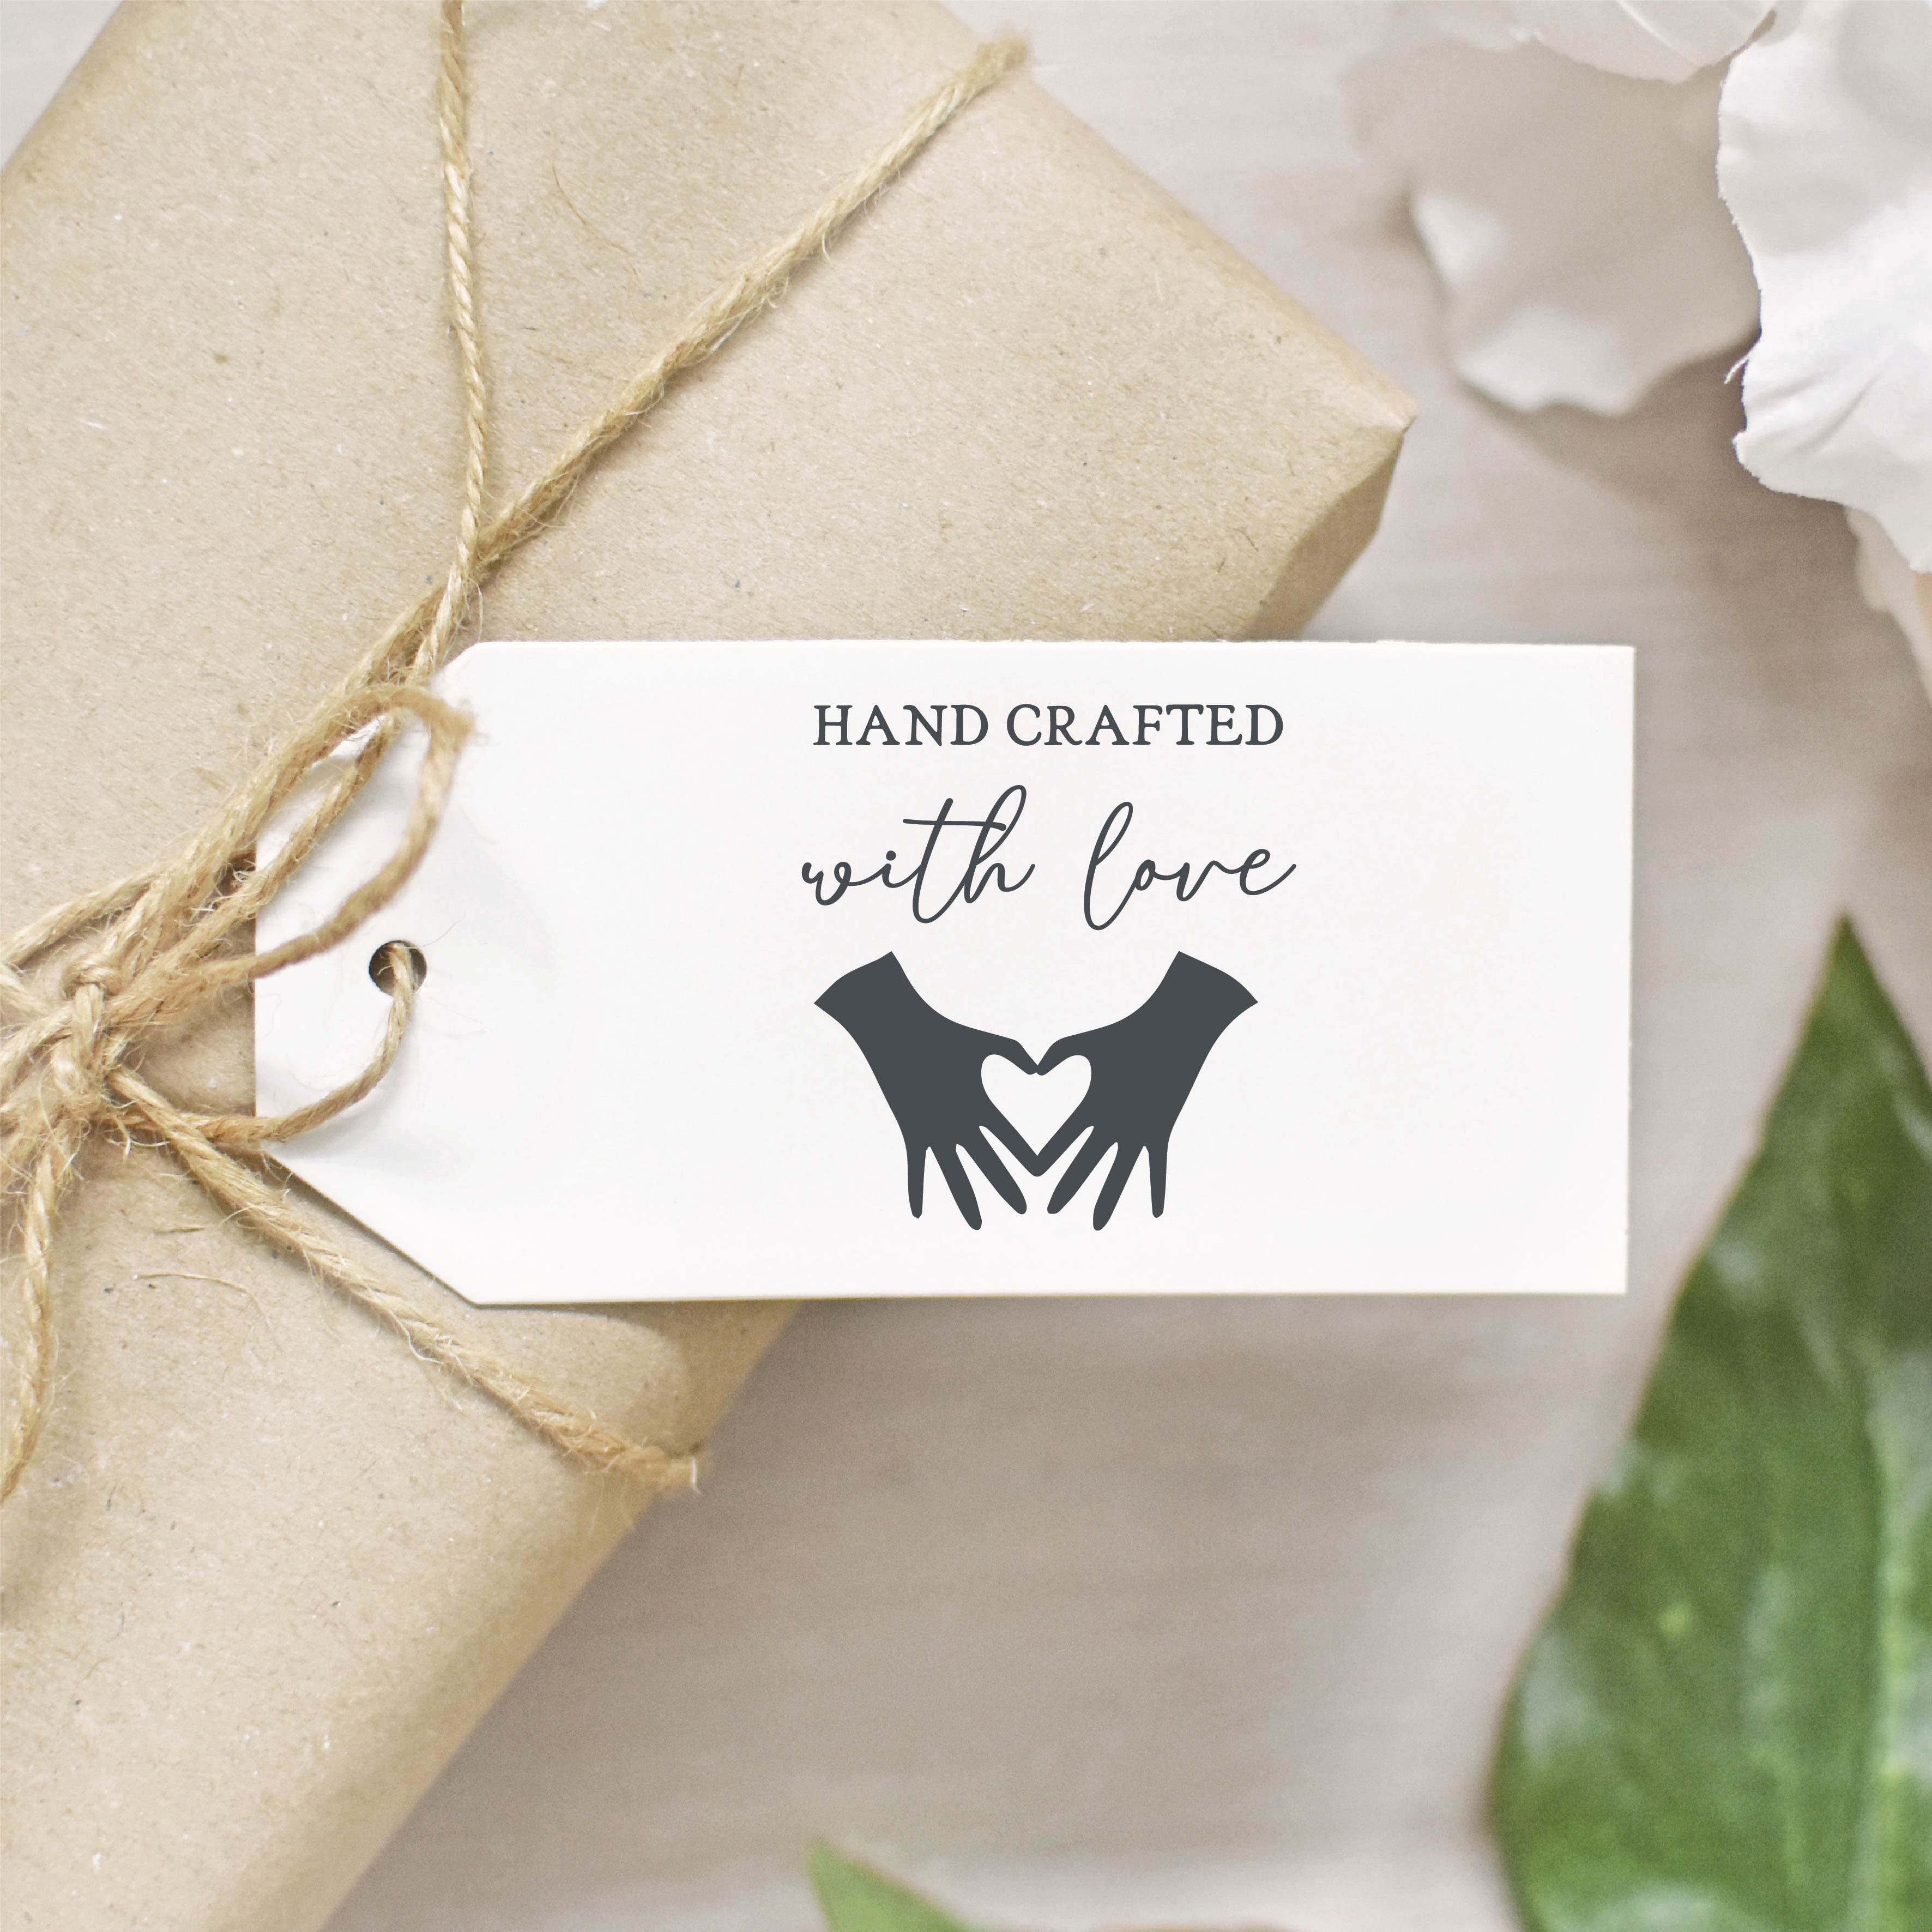 Hand Crafted With Love Stamp